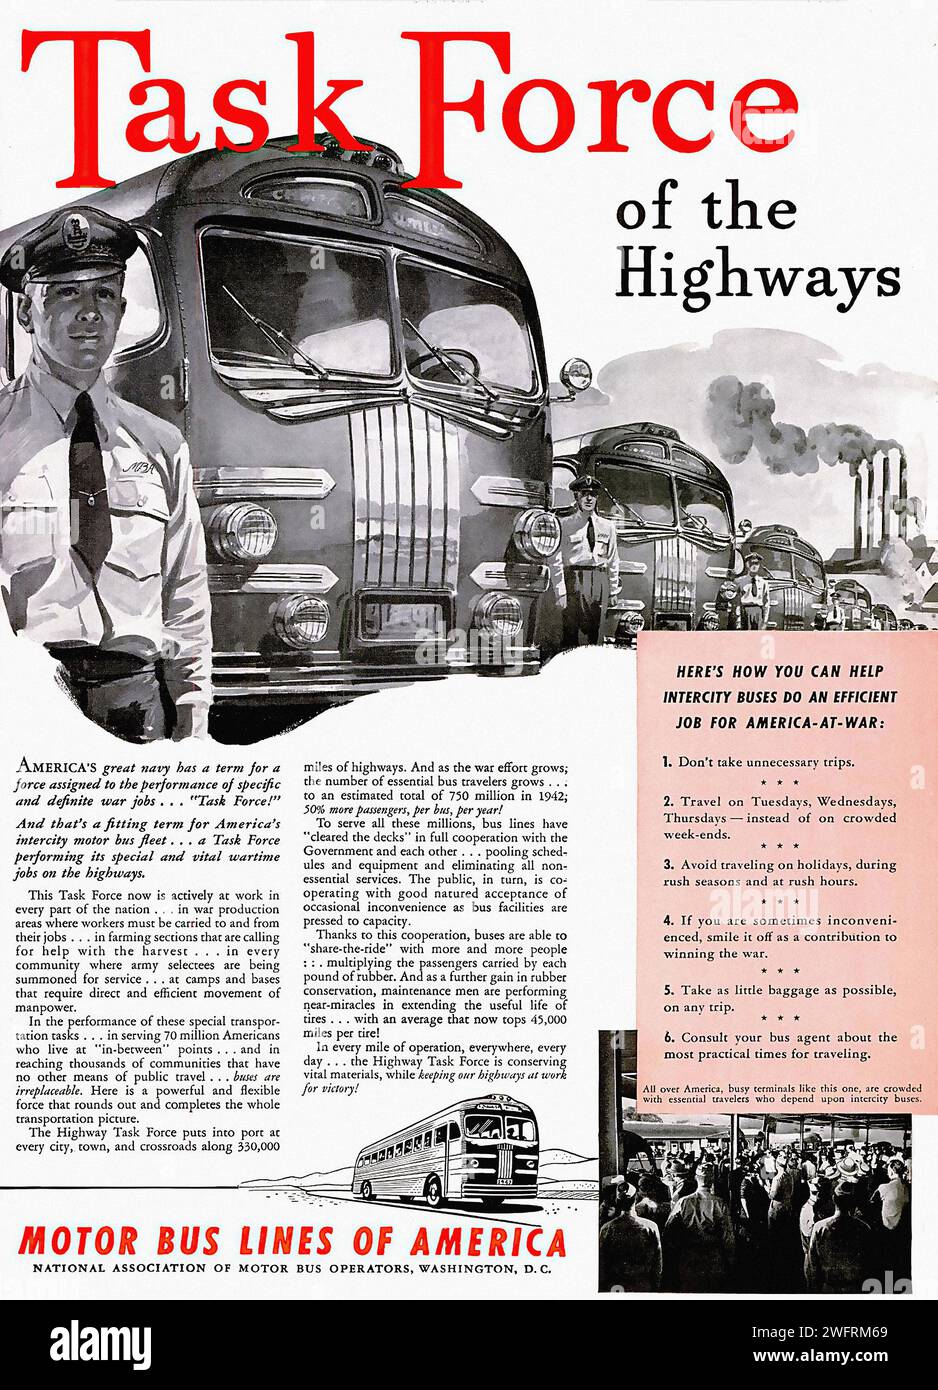 “TASK FORCE OF THE HIGHWAYS”  “An American World War II advertisement for the Motor Bus Lines of America, titled ‘Task Force of the Highways’. The black and white image features a vintage illustration of a bus and a truck on a highway, symbolizing the new era of travel. The graphic style of the advertisement is typical of the mid-20th century, with its bold typography and detailed illustrations. The advertisement is from the National Association of Motor Bus Operators in Washington, D.C.” - American (U.S.) advertising, World War II era Stock Photo